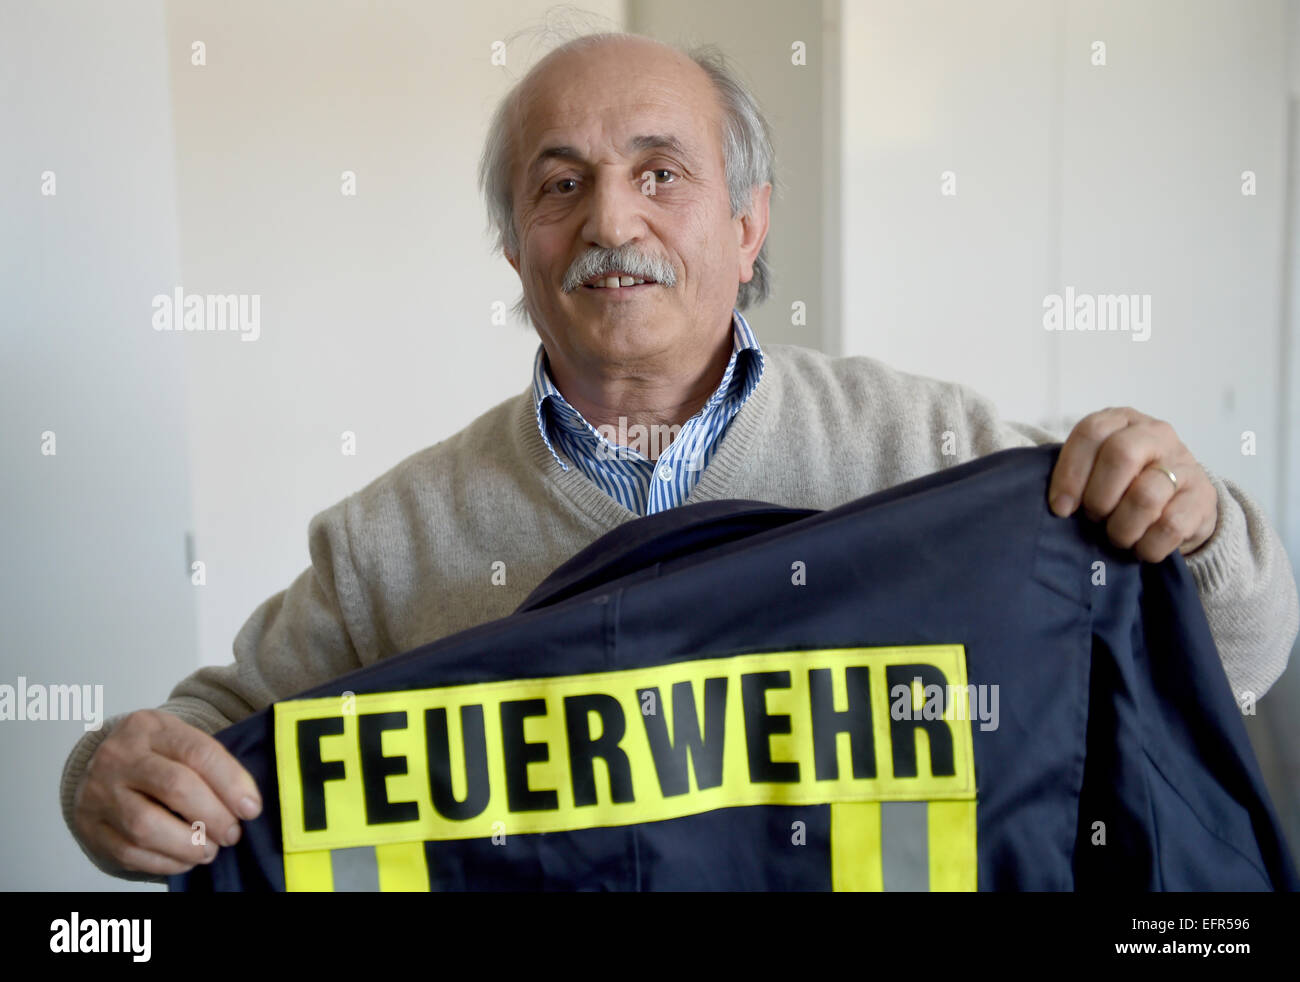 Kiel, Germany. 6th Feb, 2015. The chairman of the local Turkish congragation, Cebel Kucukkaraca, holds a jacket of the local fire department in his hands in Kiel, Germany, 6 February 2015. The Turkish community in Kiel is supporting a stronger engagement of its members in local social services such as civil protection and the fire brigade. Photo: Carsten Rehder/dpa/Alamy Live News Stock Photo